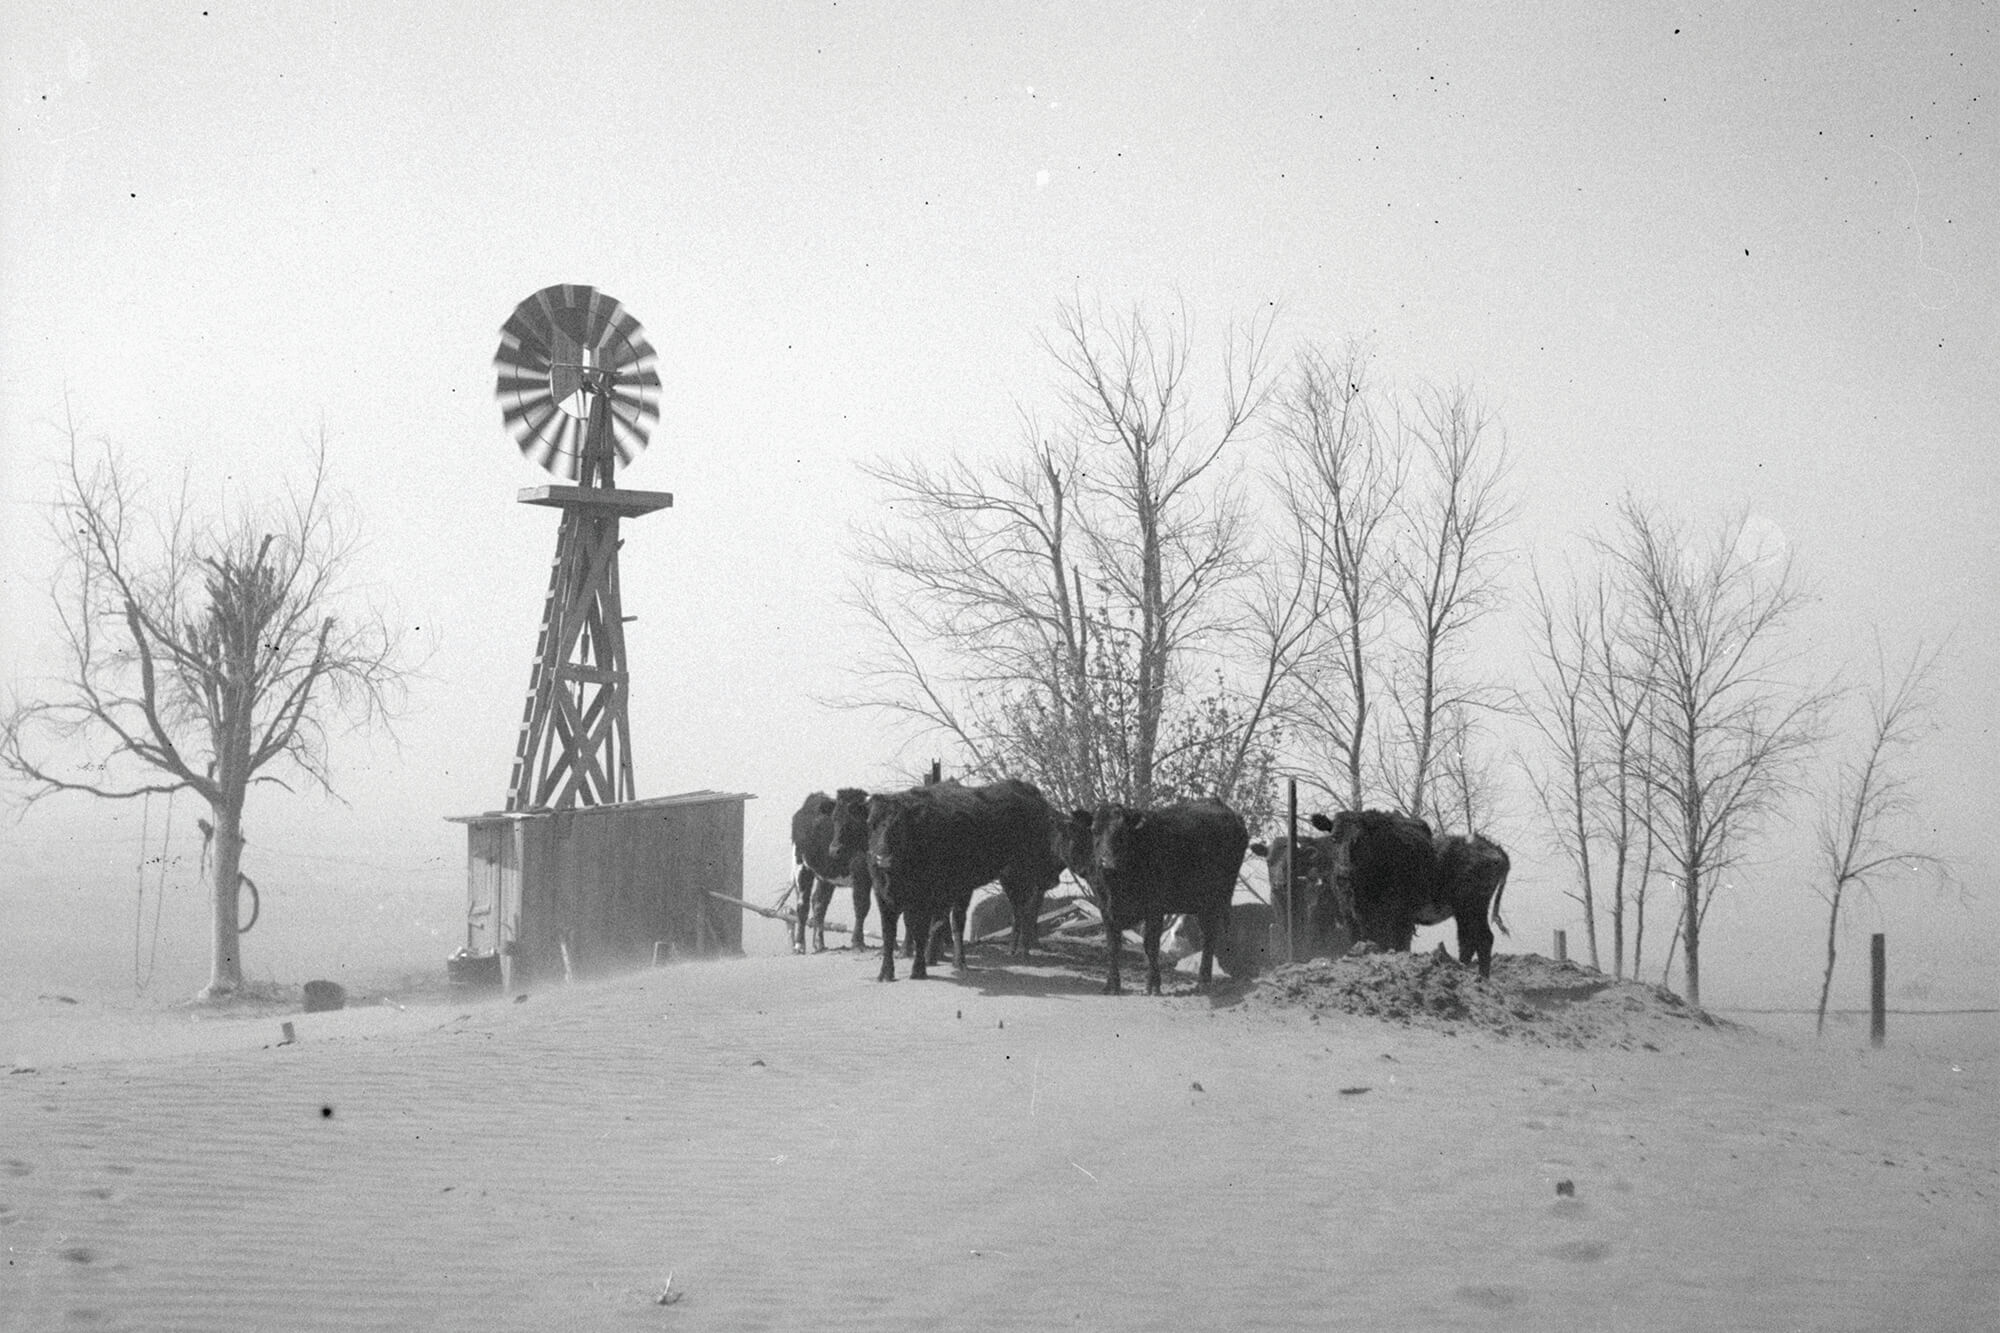 Cattle standing in a dry barren field next to a windmill during the dustbowl.